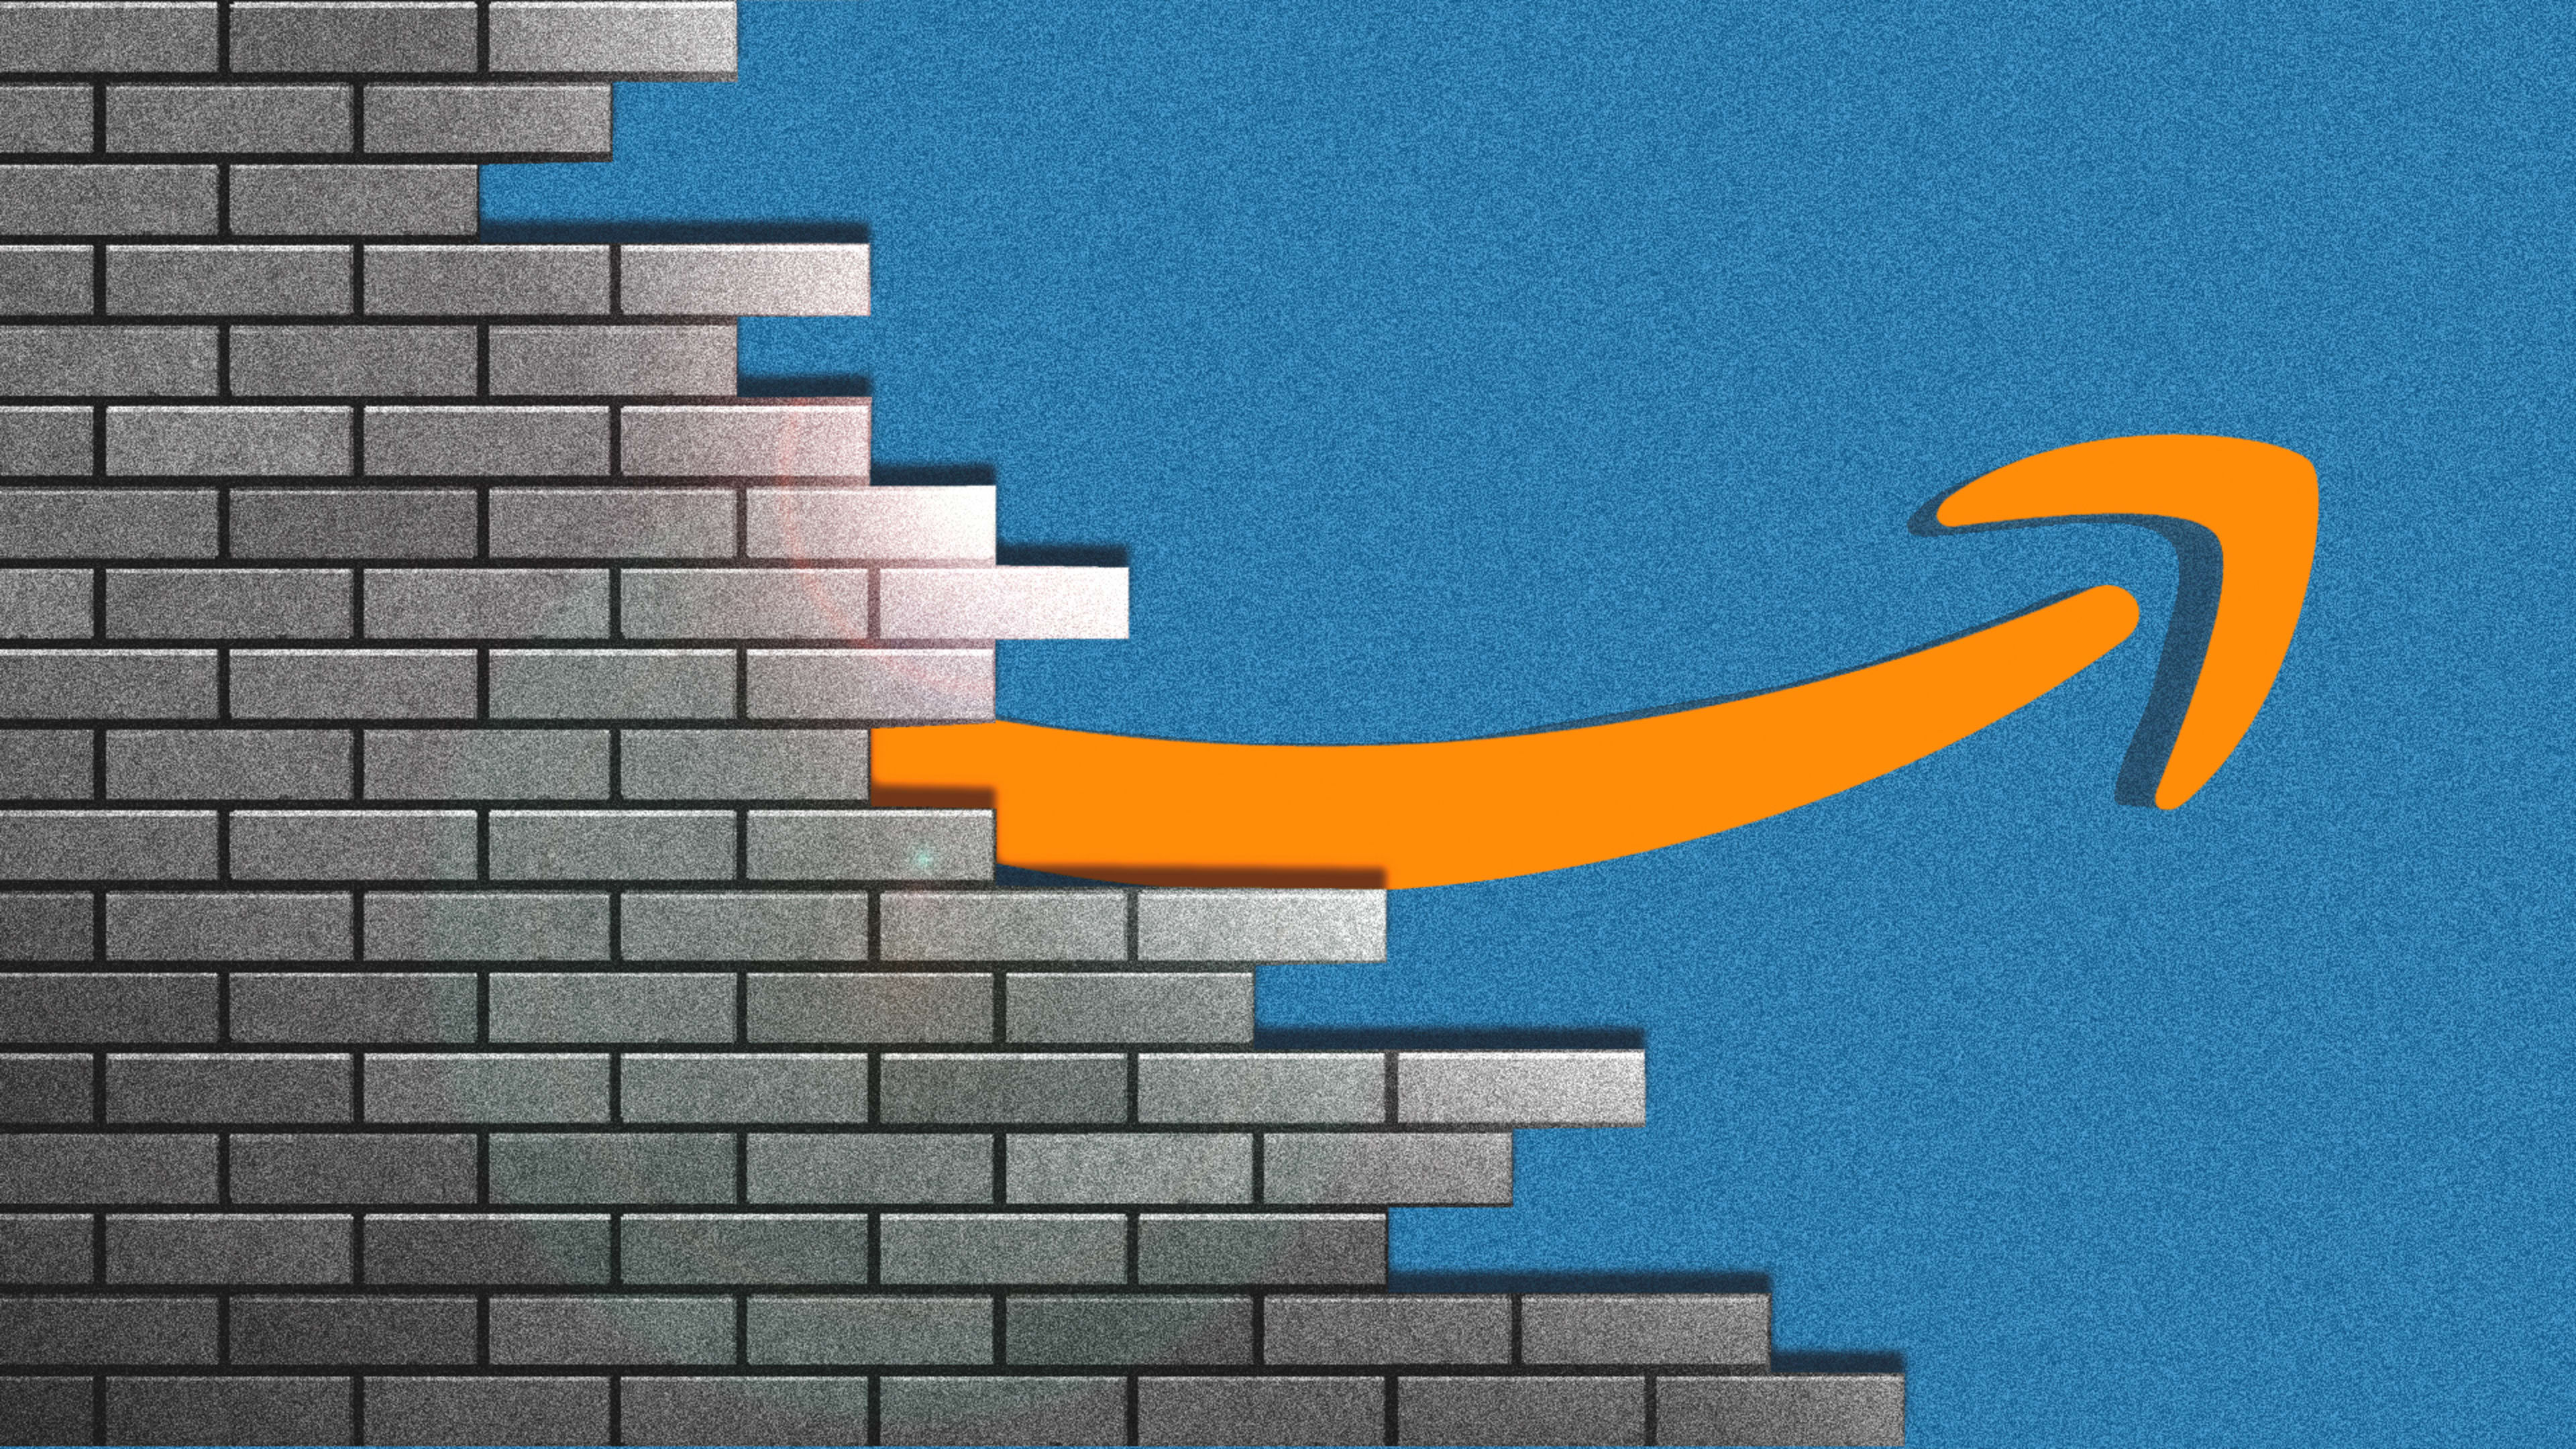 Your business can’t beat Amazon—but there’s still a way to coexist